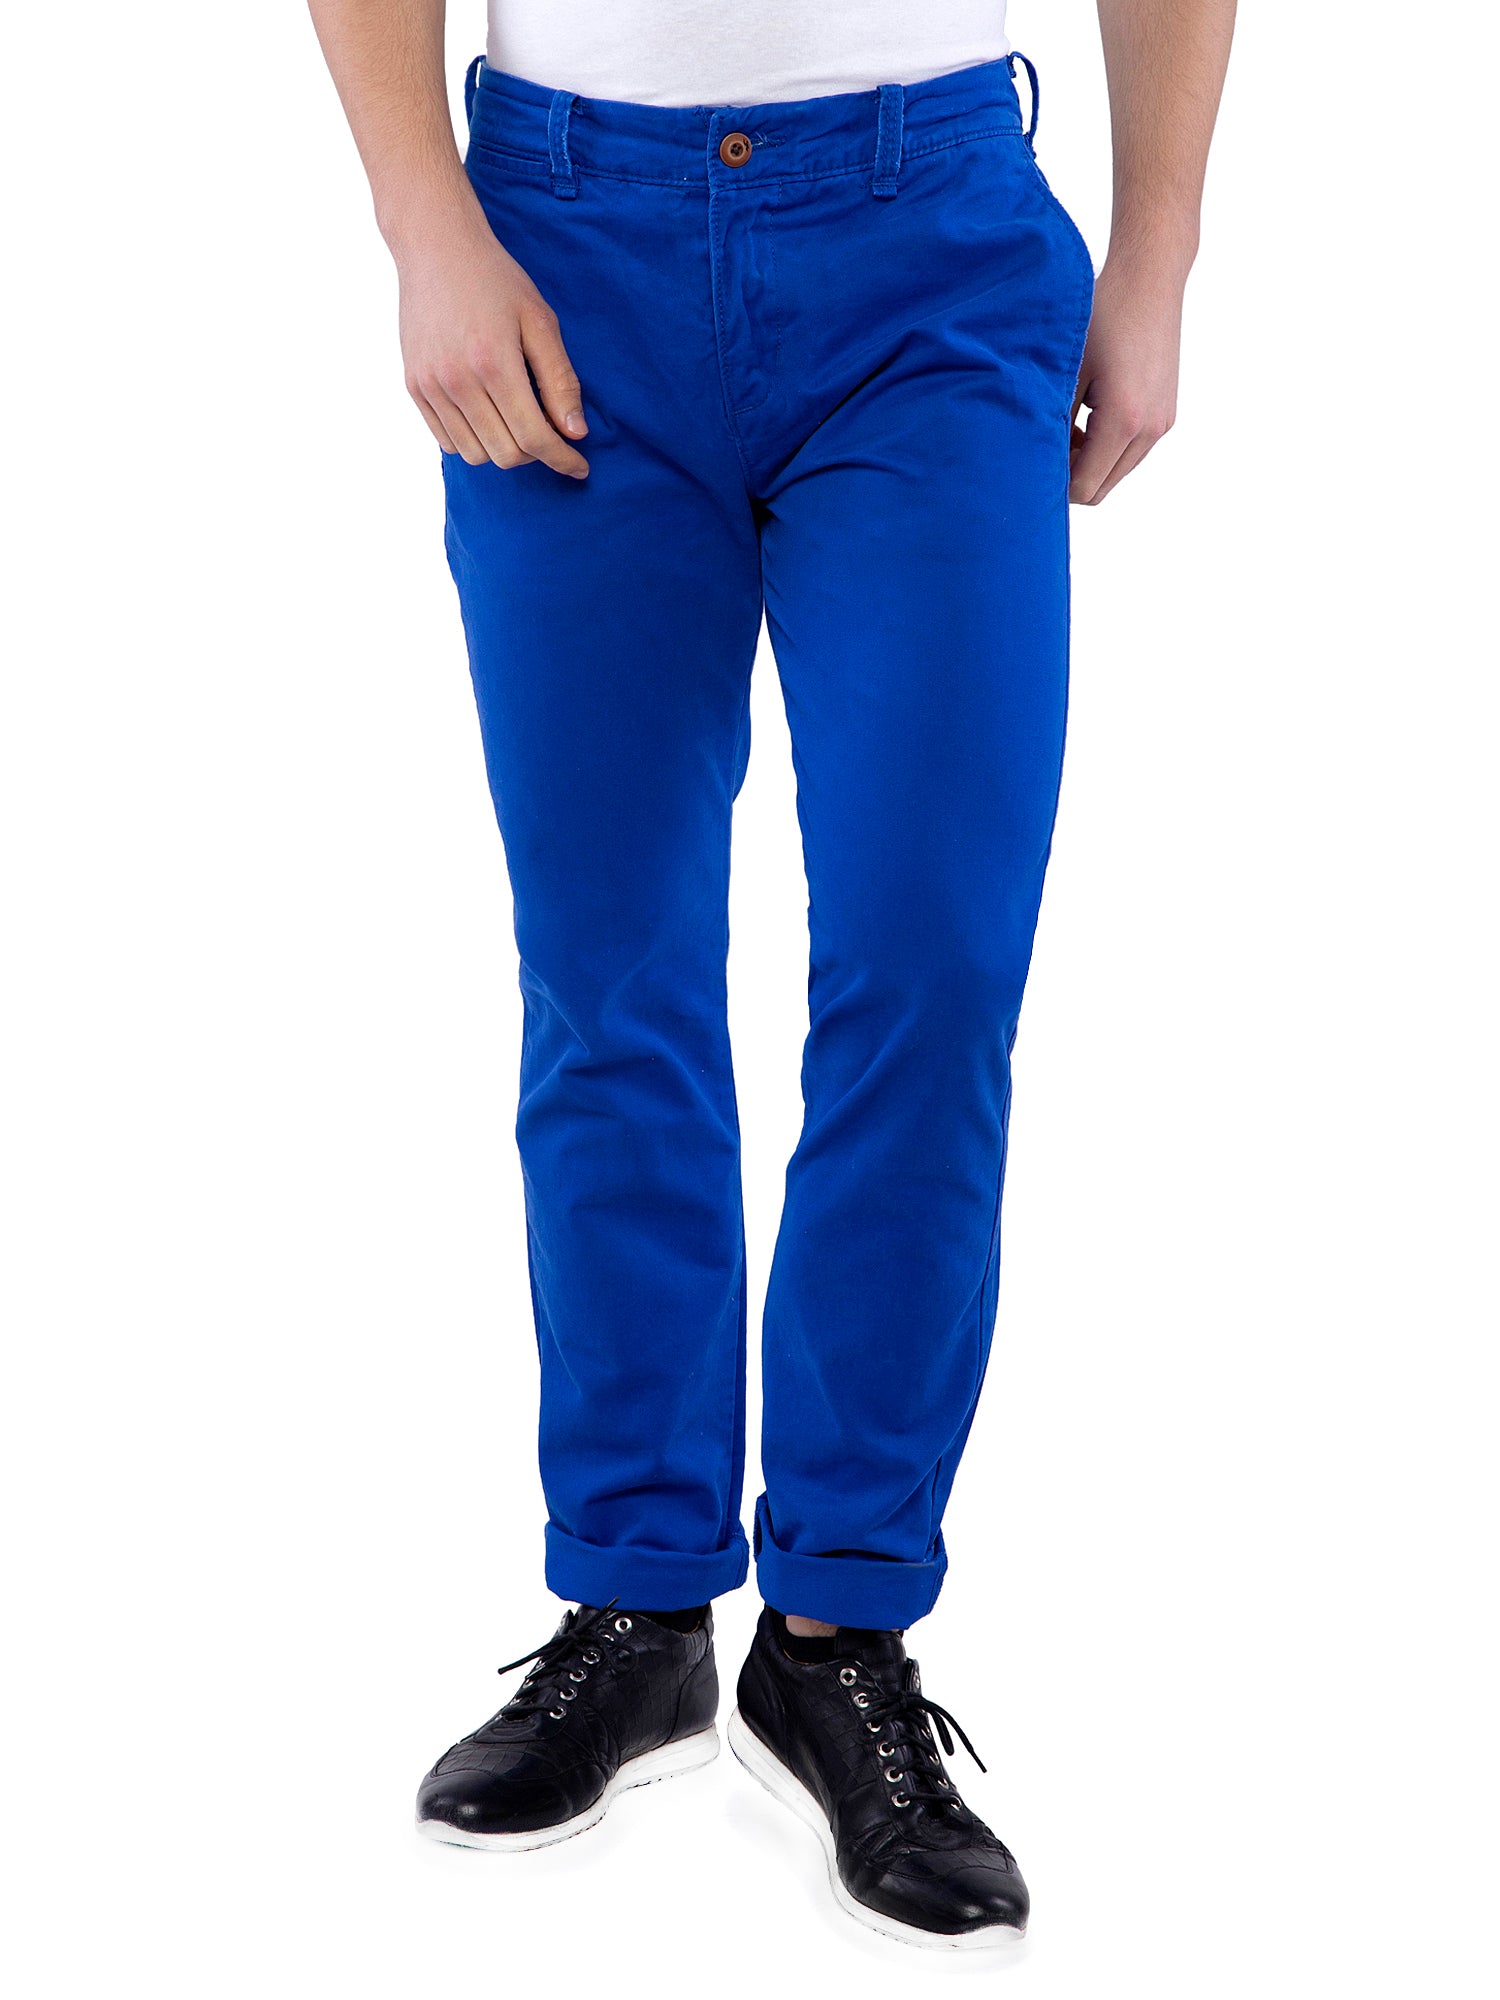 MENS SUPER STRETCHABLE SILKY FABRIC CROSS POCKET RELAX FIT JEANSCHINOS ROYAL  BLUE